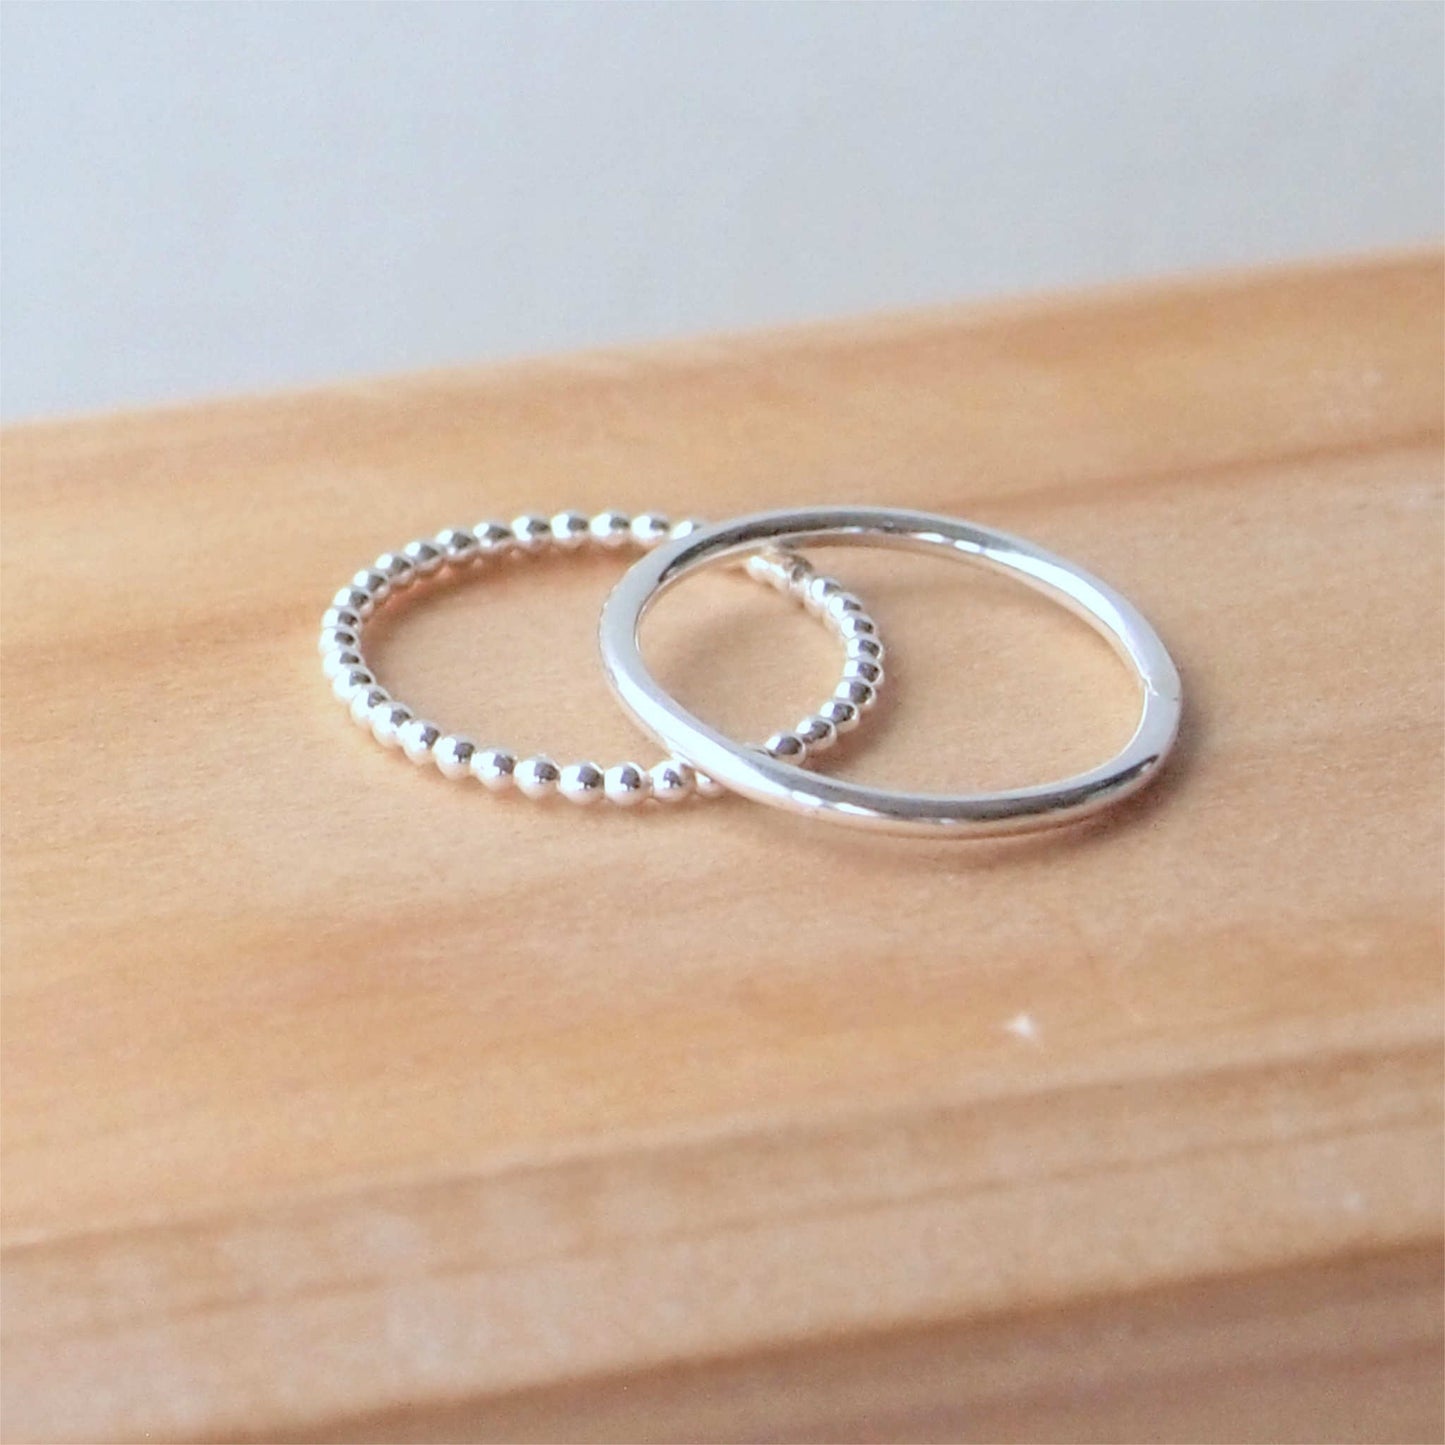 Double silver ring set with two textured band. One is a fully round halo style band and the second is a 'bubble' style ring that is made from tiny circles of sterling silver pearl wire in a row. The rings are Sterling Silver and Handmade in Scotland by maram jewellery